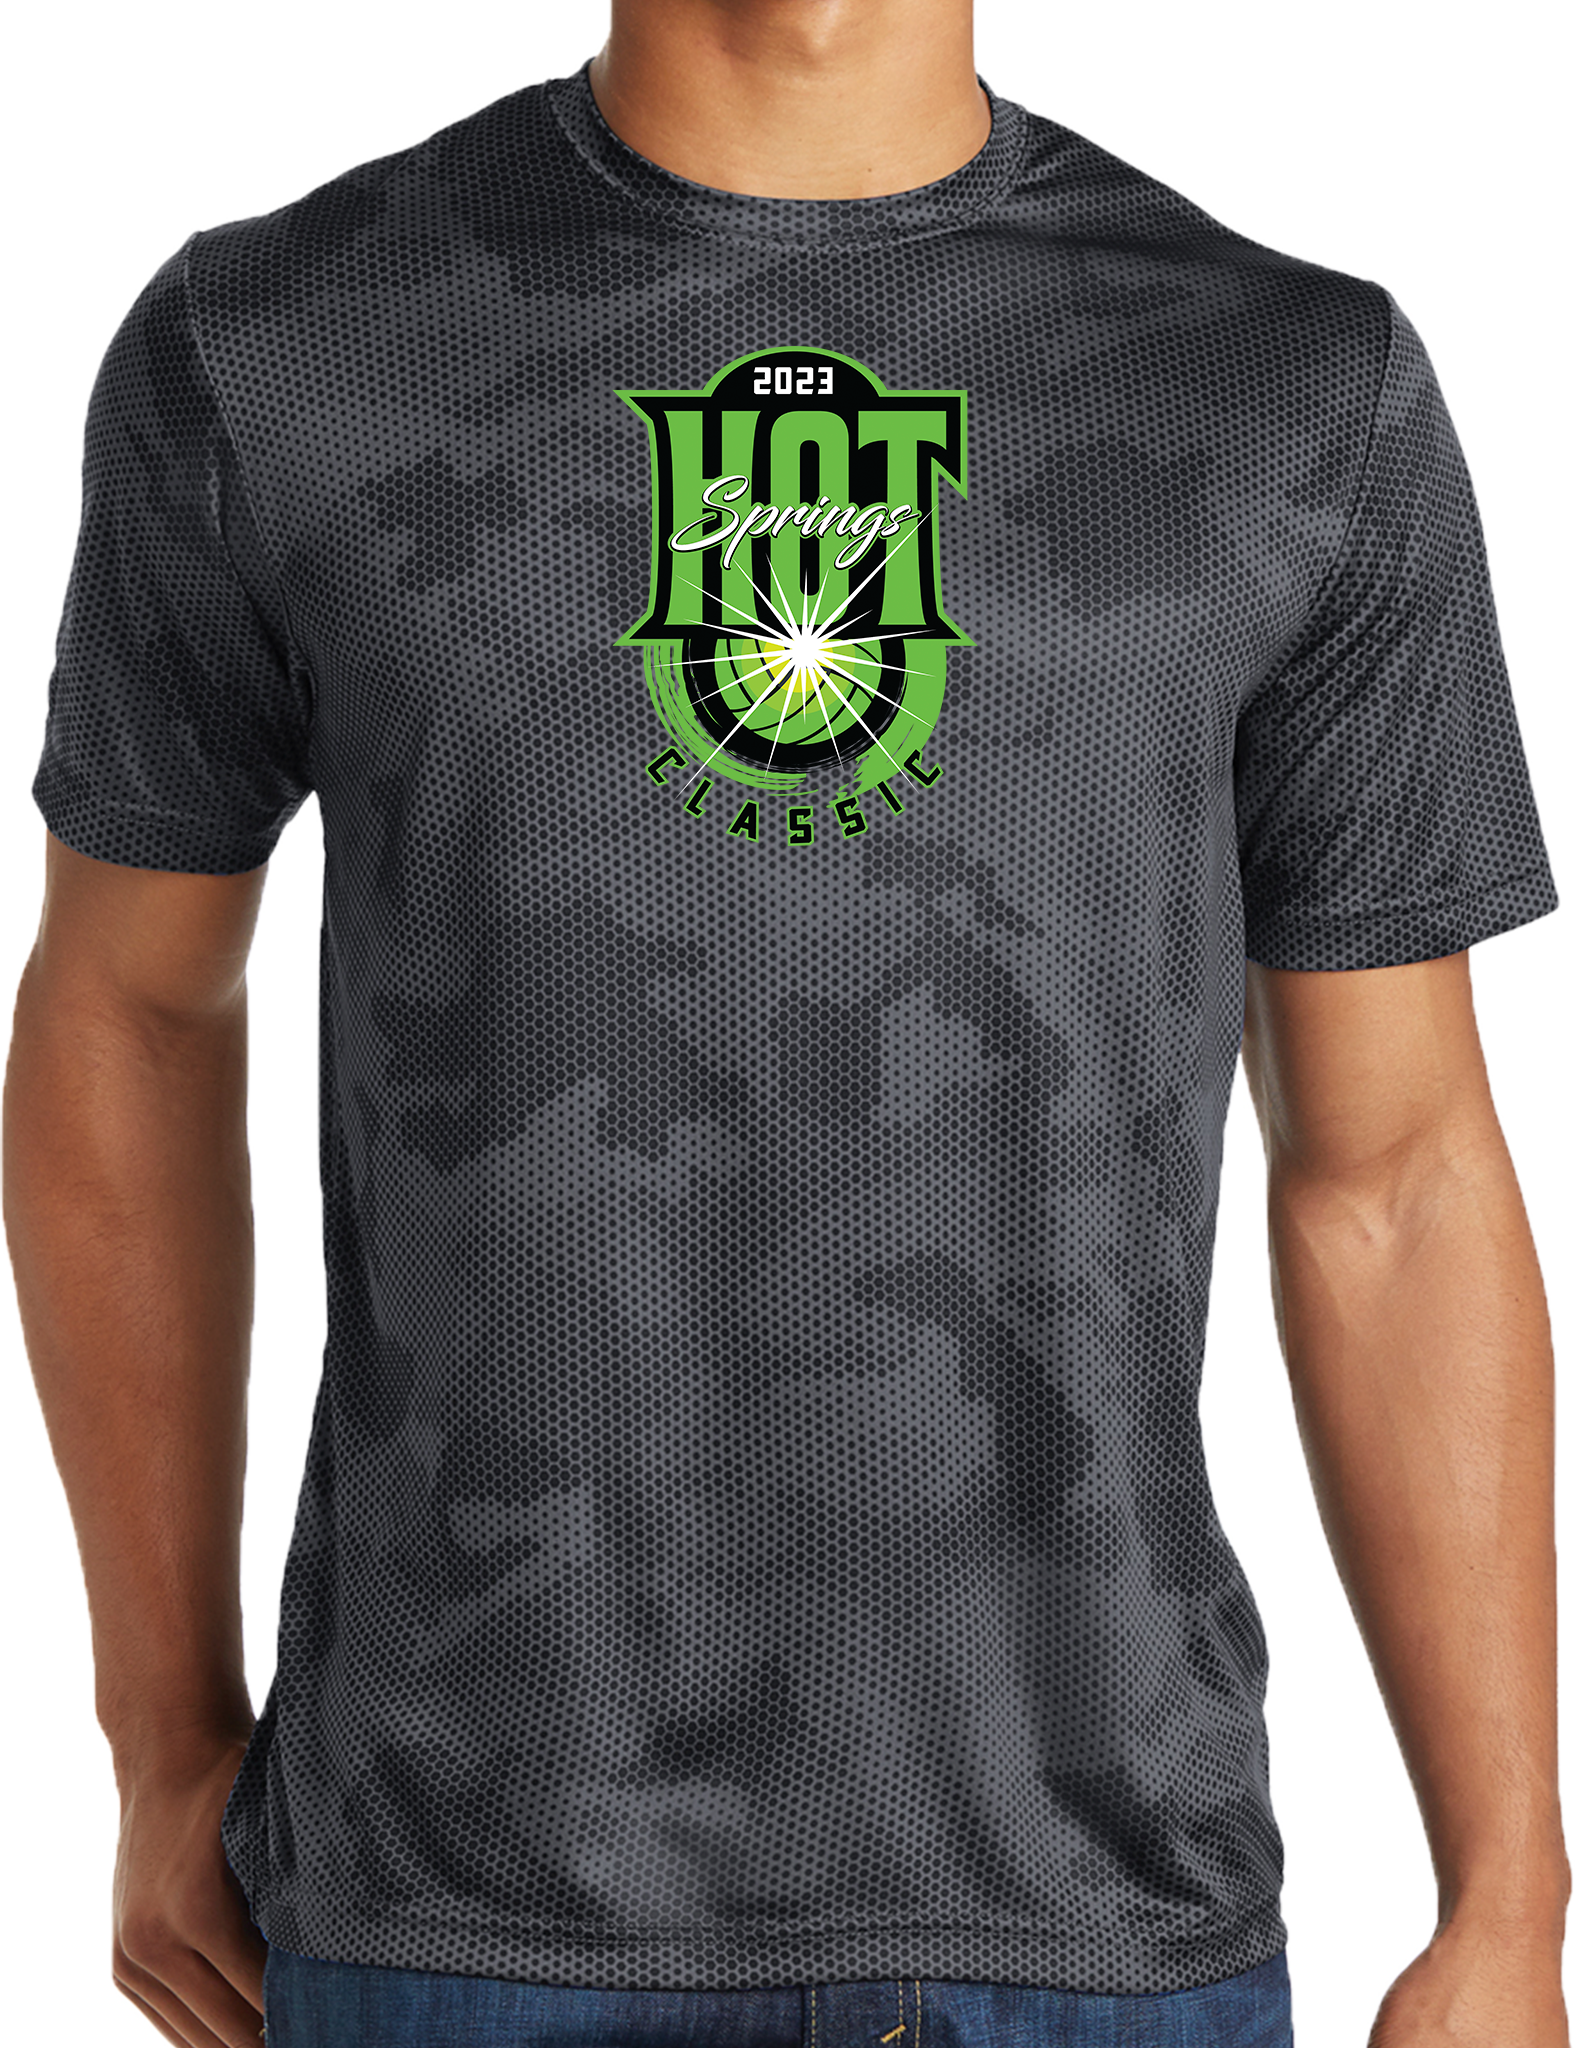 PERFORMANCE SHIRTS - 2023 Hot Springs Classic